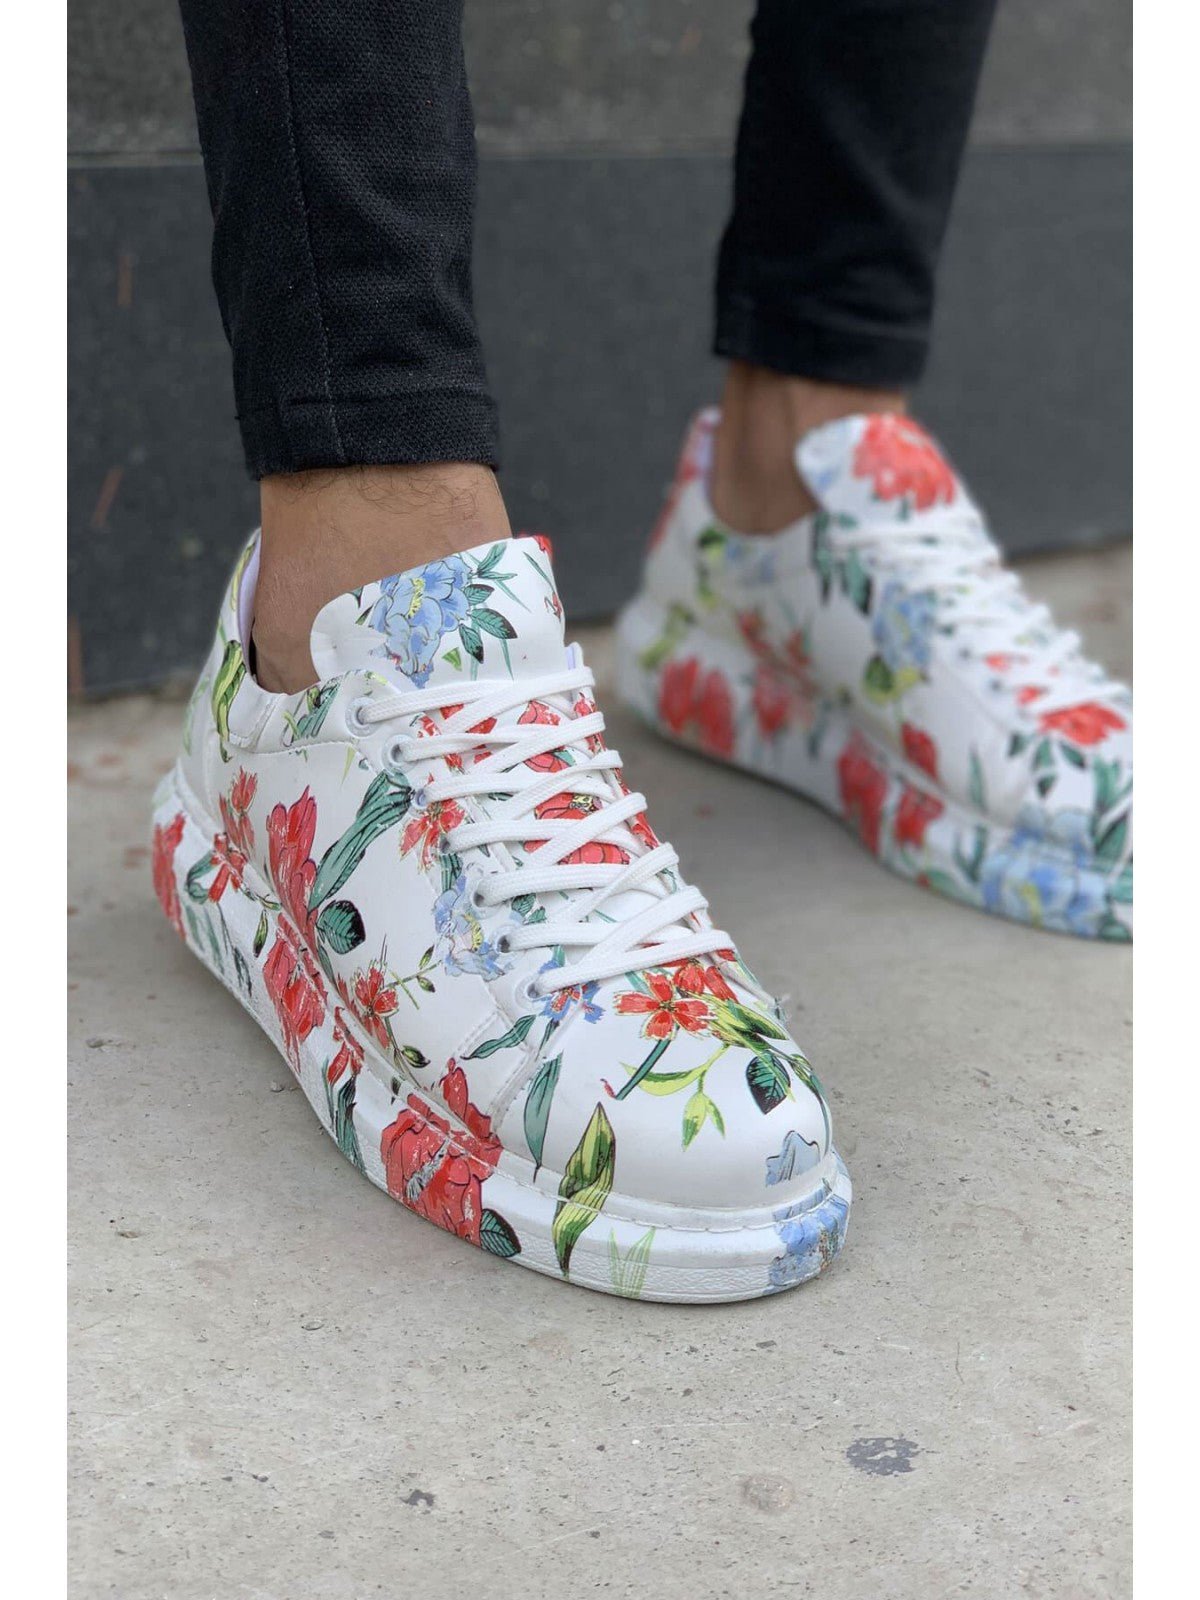 Top more than 259 floral design sneakers best